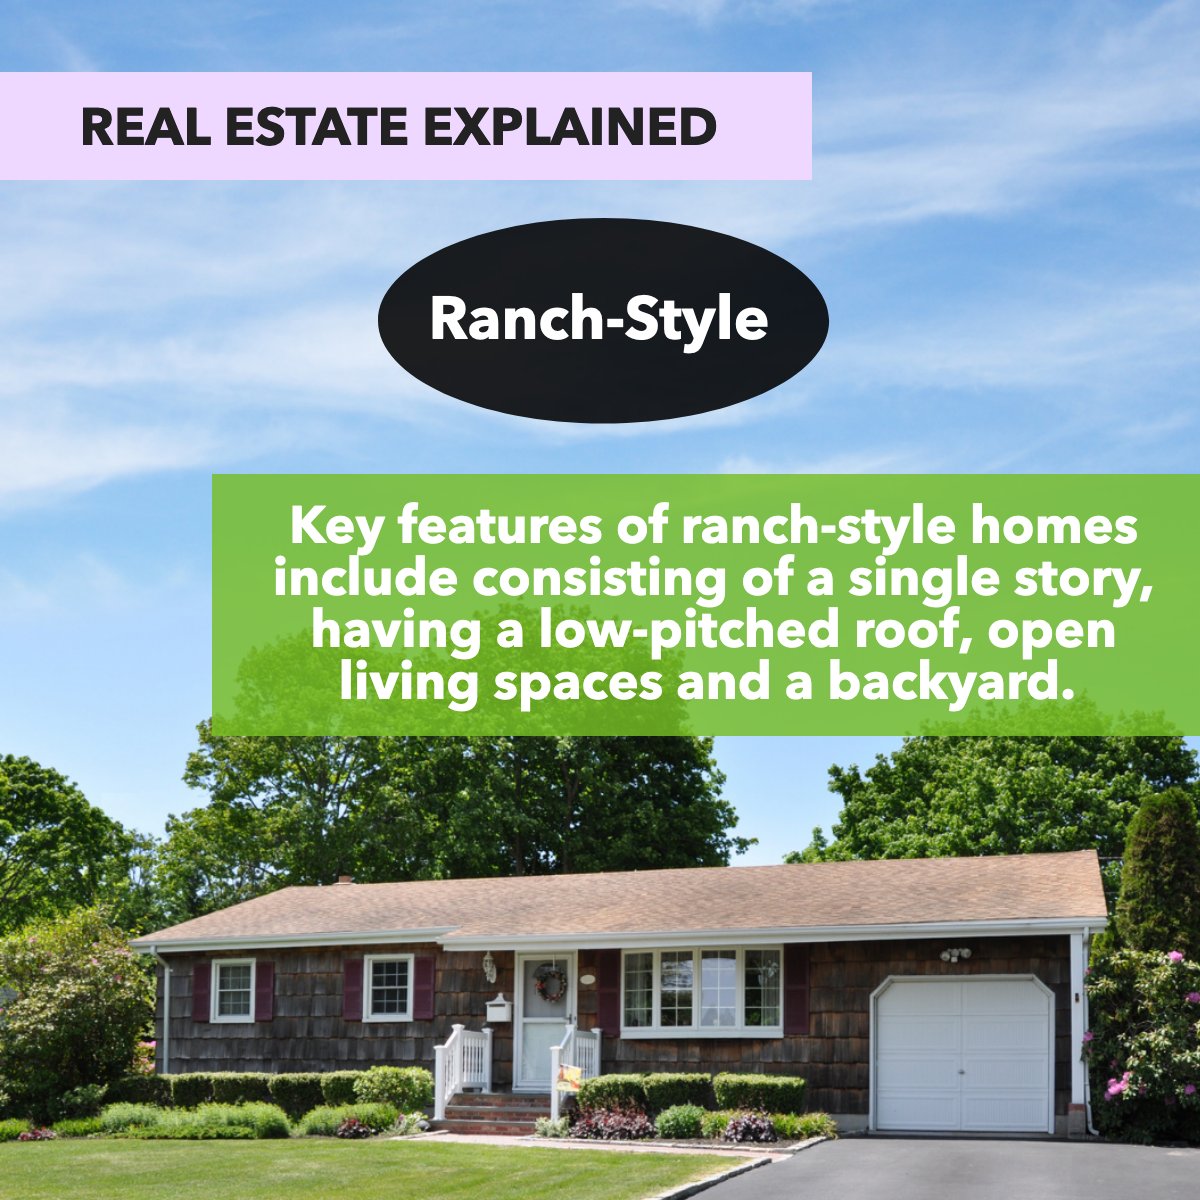 Ranch-style houses are now the most commonly searched-for style of home in the United States. 🏘️

#ranchostyle #ranchhousestyle #ranchstylehomes
 #leighannesellshomes #jointhelashteam #callmeforyourrealestateneeds #realestate #clientscomefirst #househunting